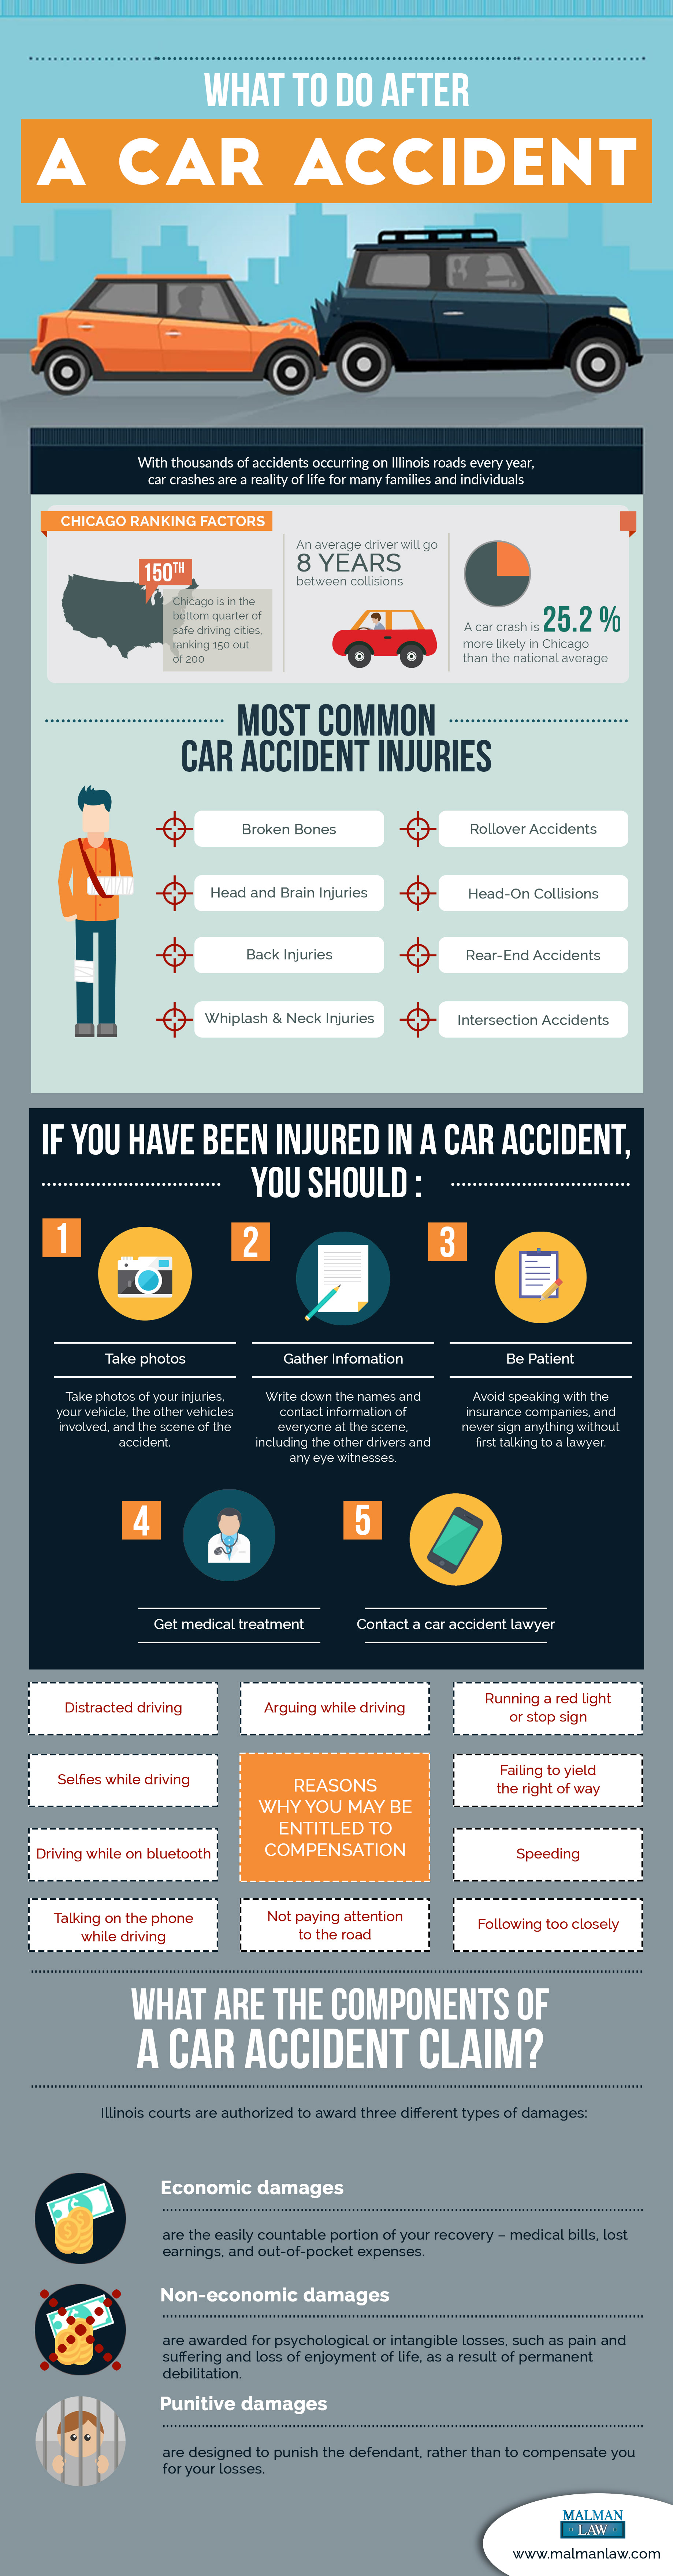 what to do after car accidents infographic